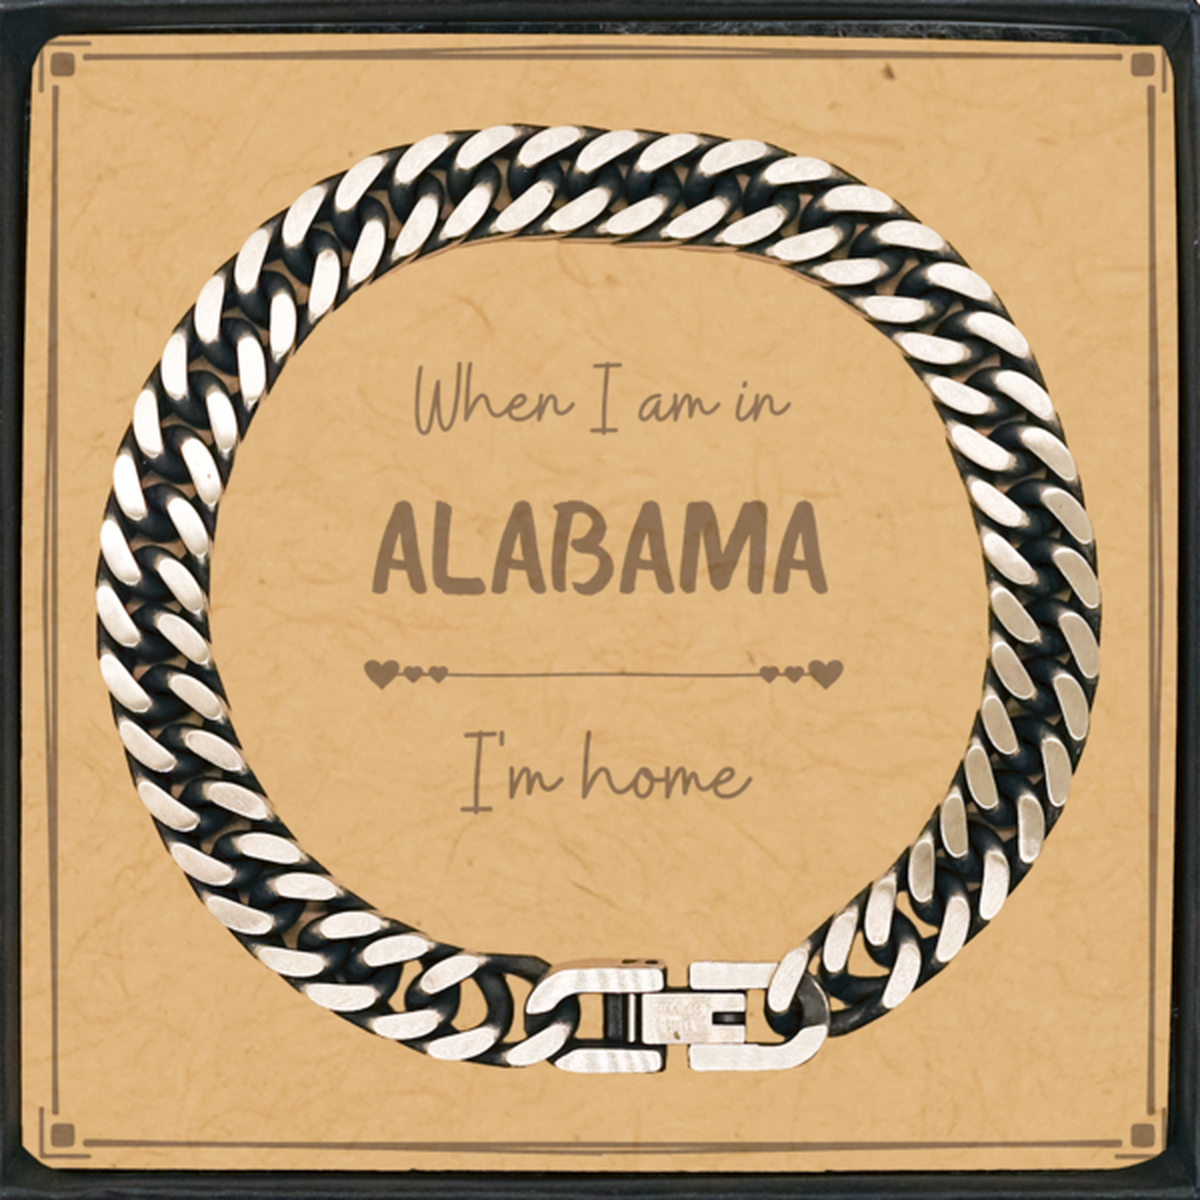 When I am in Alabama I'm home Cuban Link Chain Bracelet, Message Card Gifts For Alabama, State Alabama Birthday Gifts for Friends Coworker